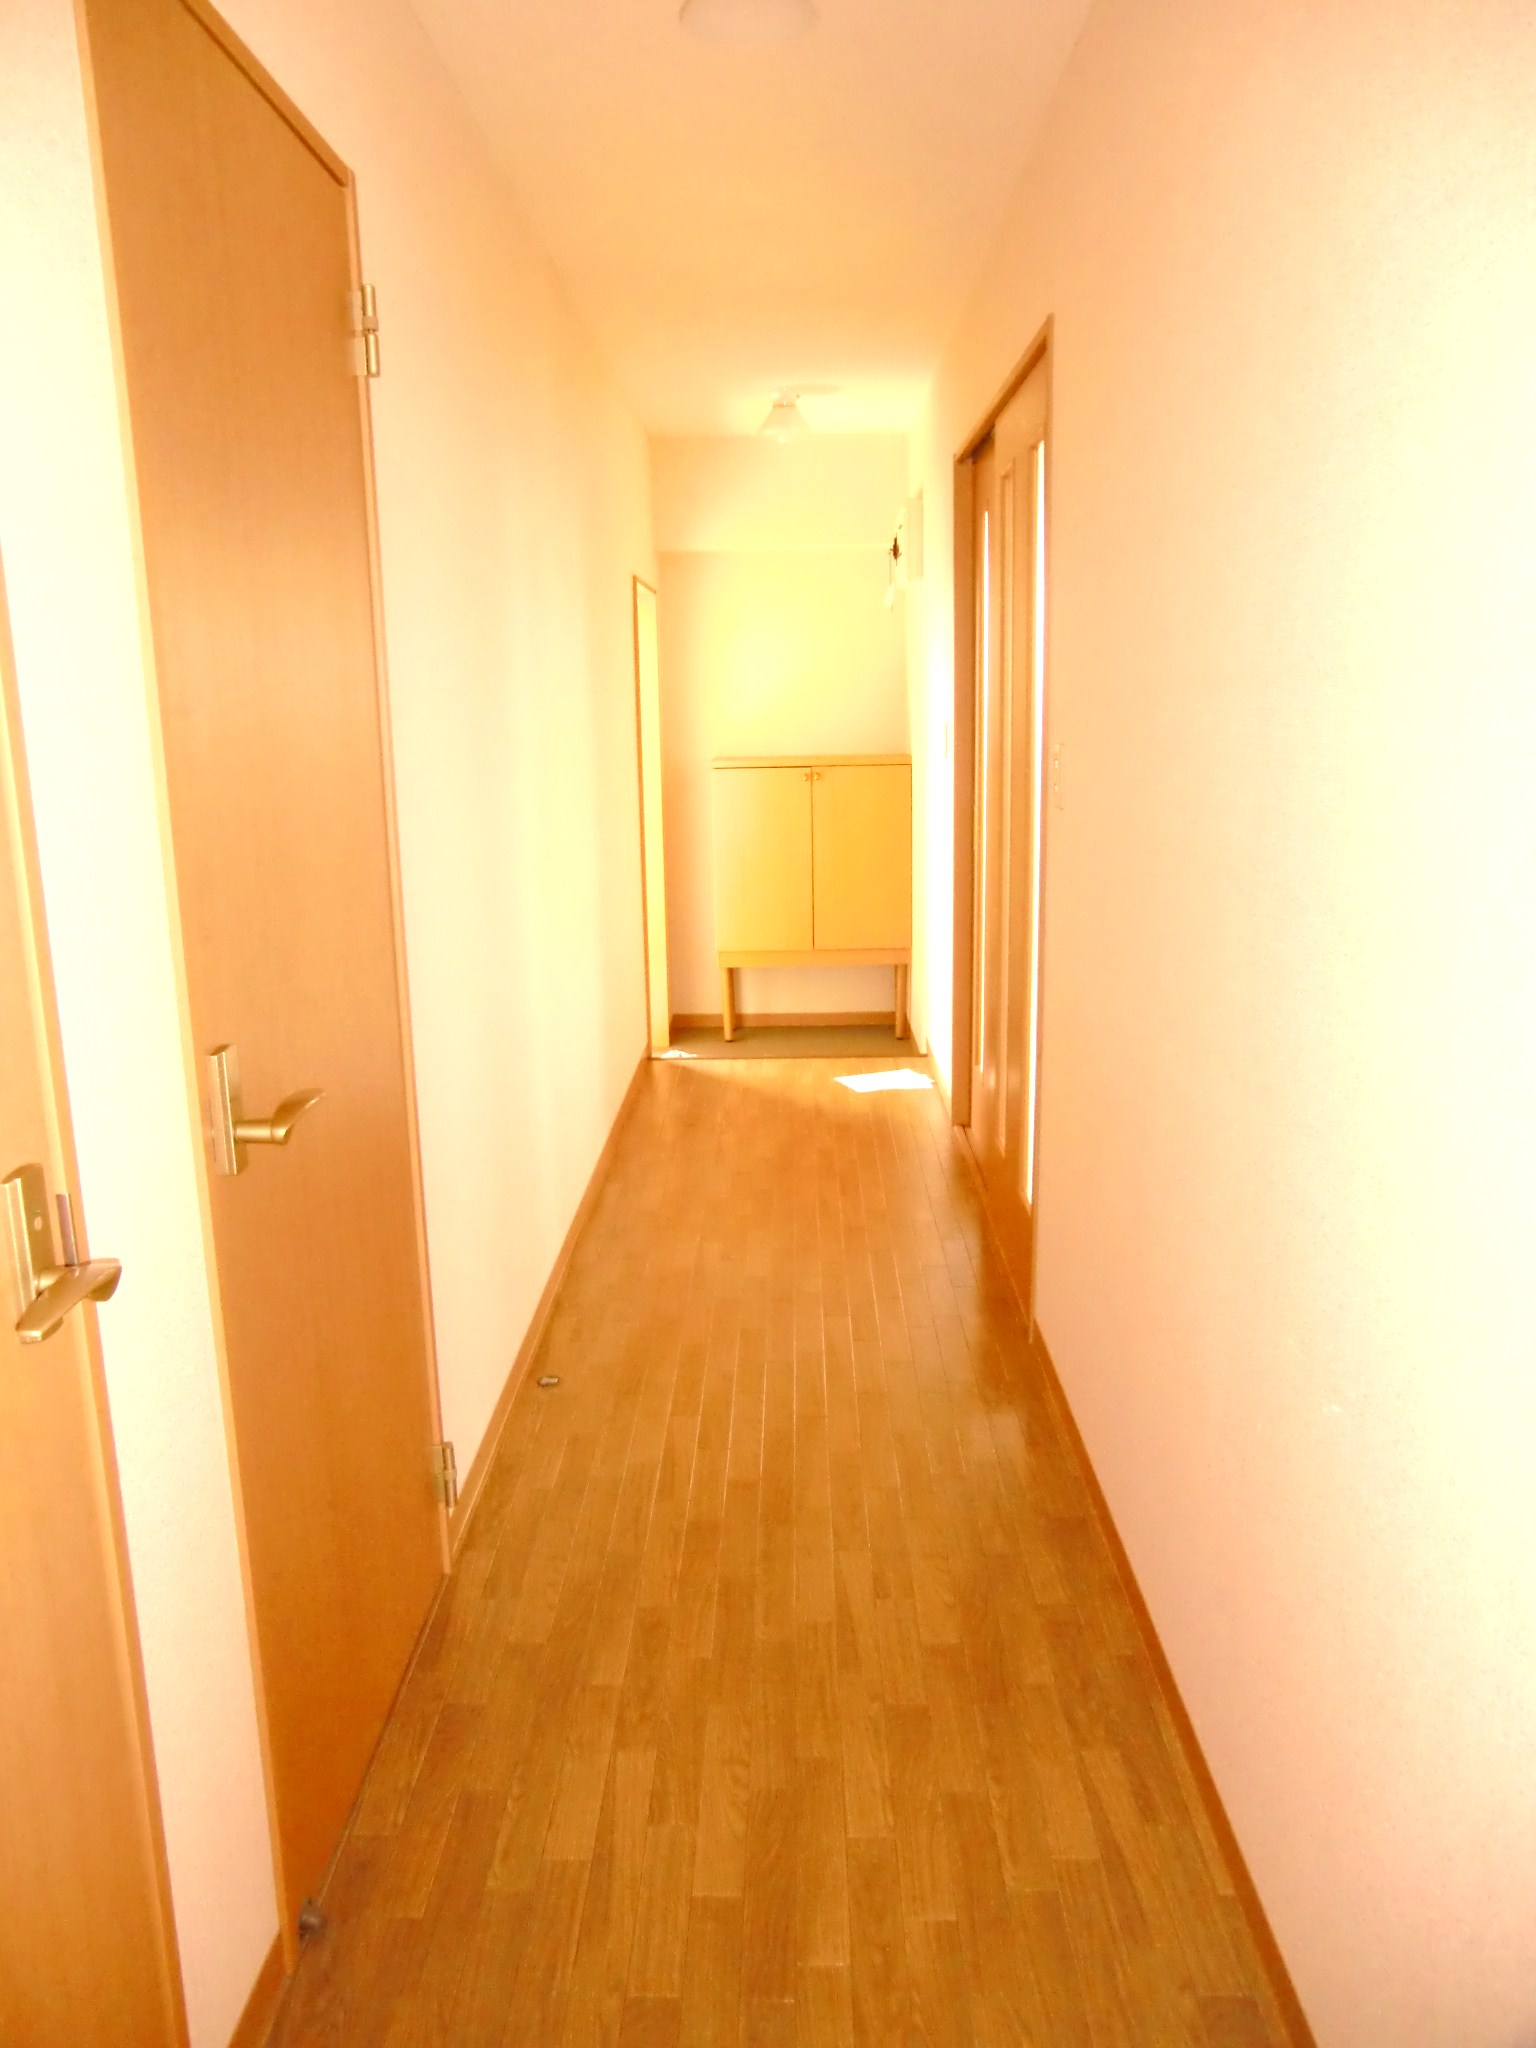 Entrance.  ☆ Corridor ☆ You can not see the room from the front door